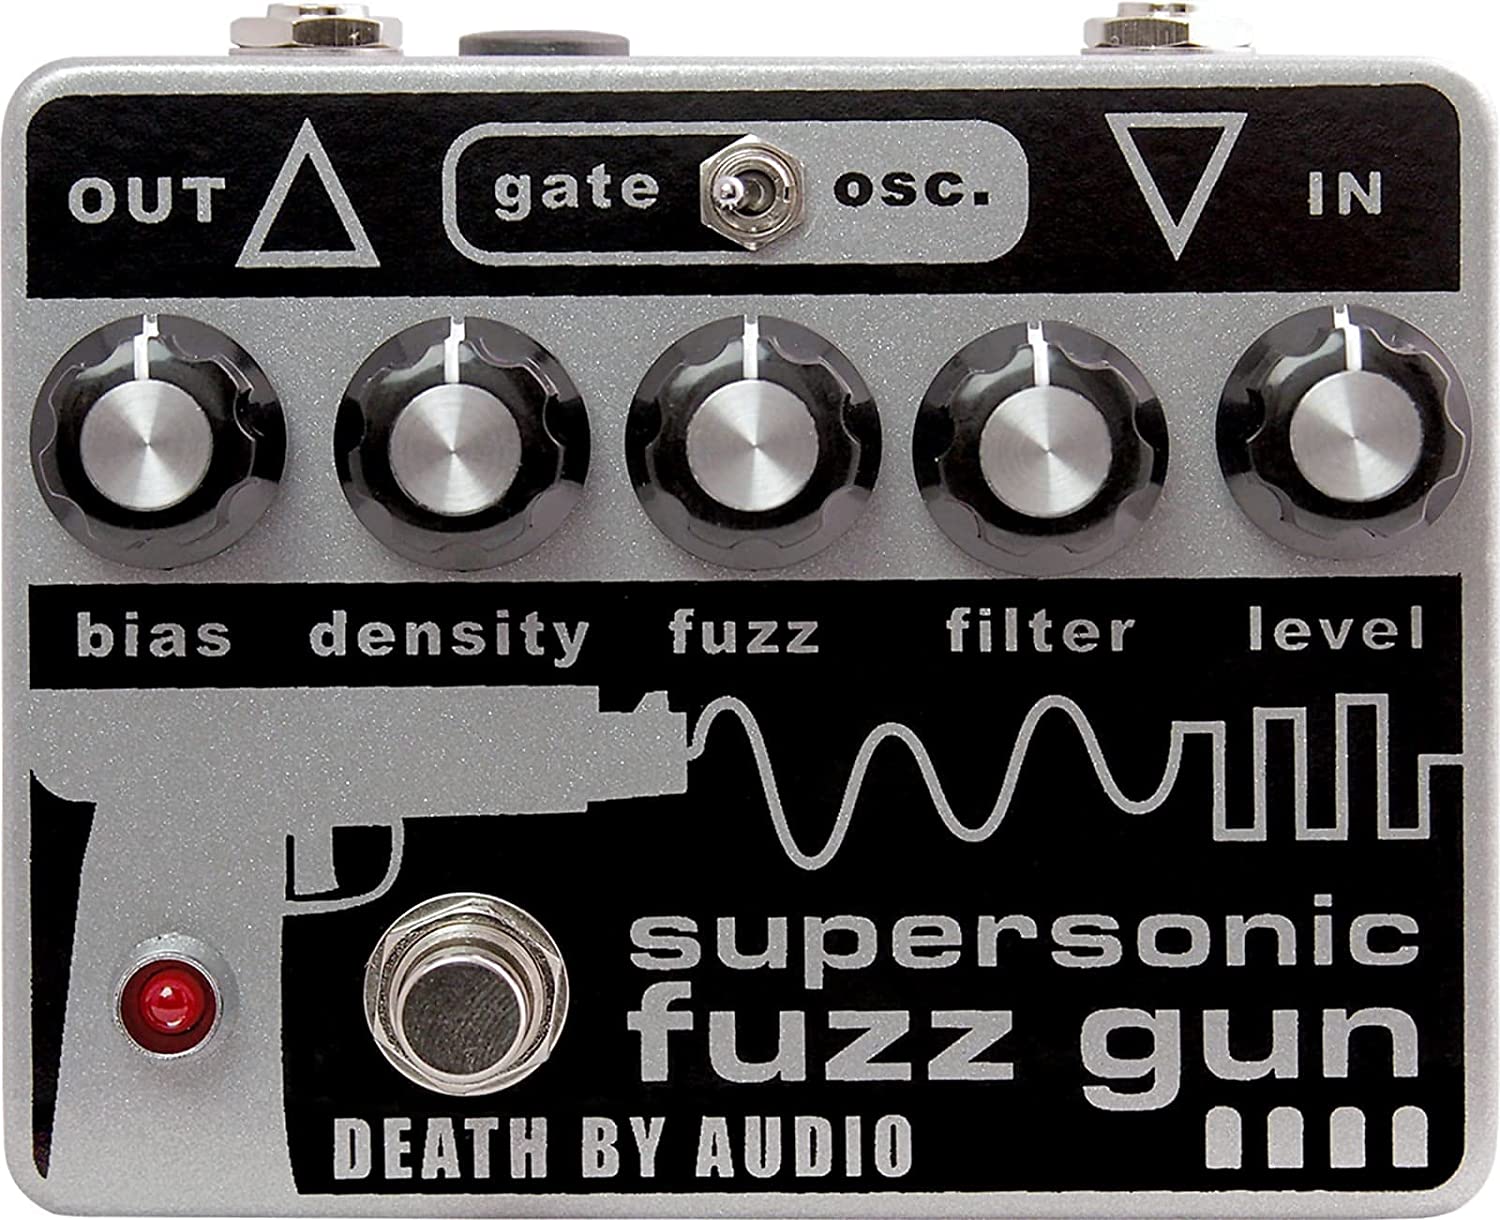 Death by Audio Supersonic Fuzz Gun Fuzz Pedal on a white background